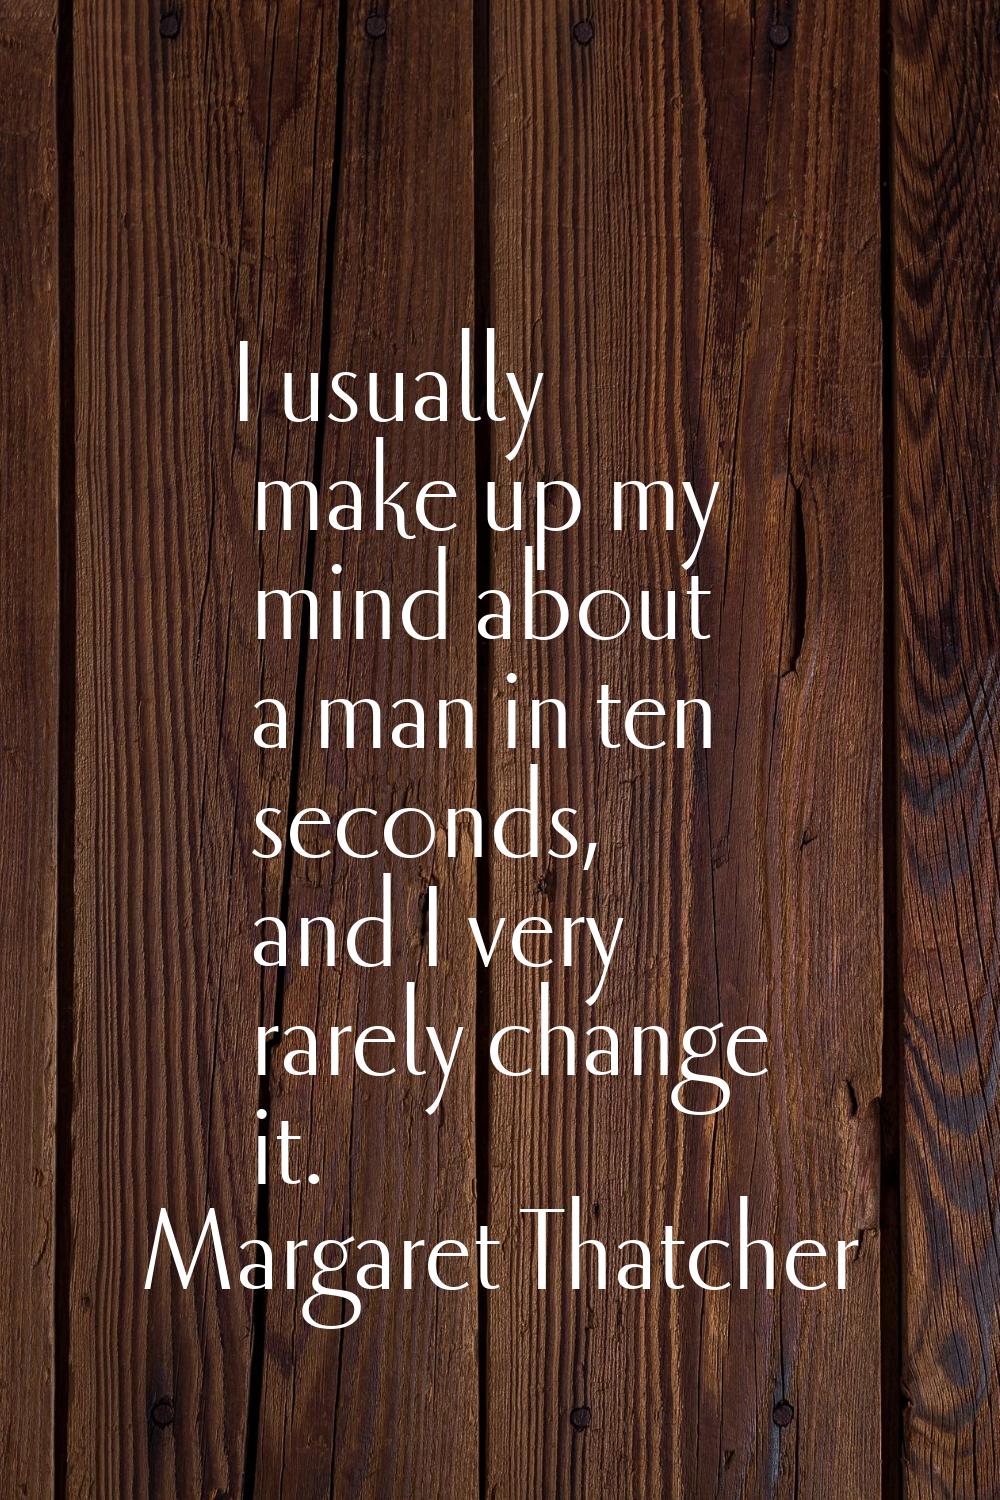 I usually make up my mind about a man in ten seconds, and I very rarely change it.